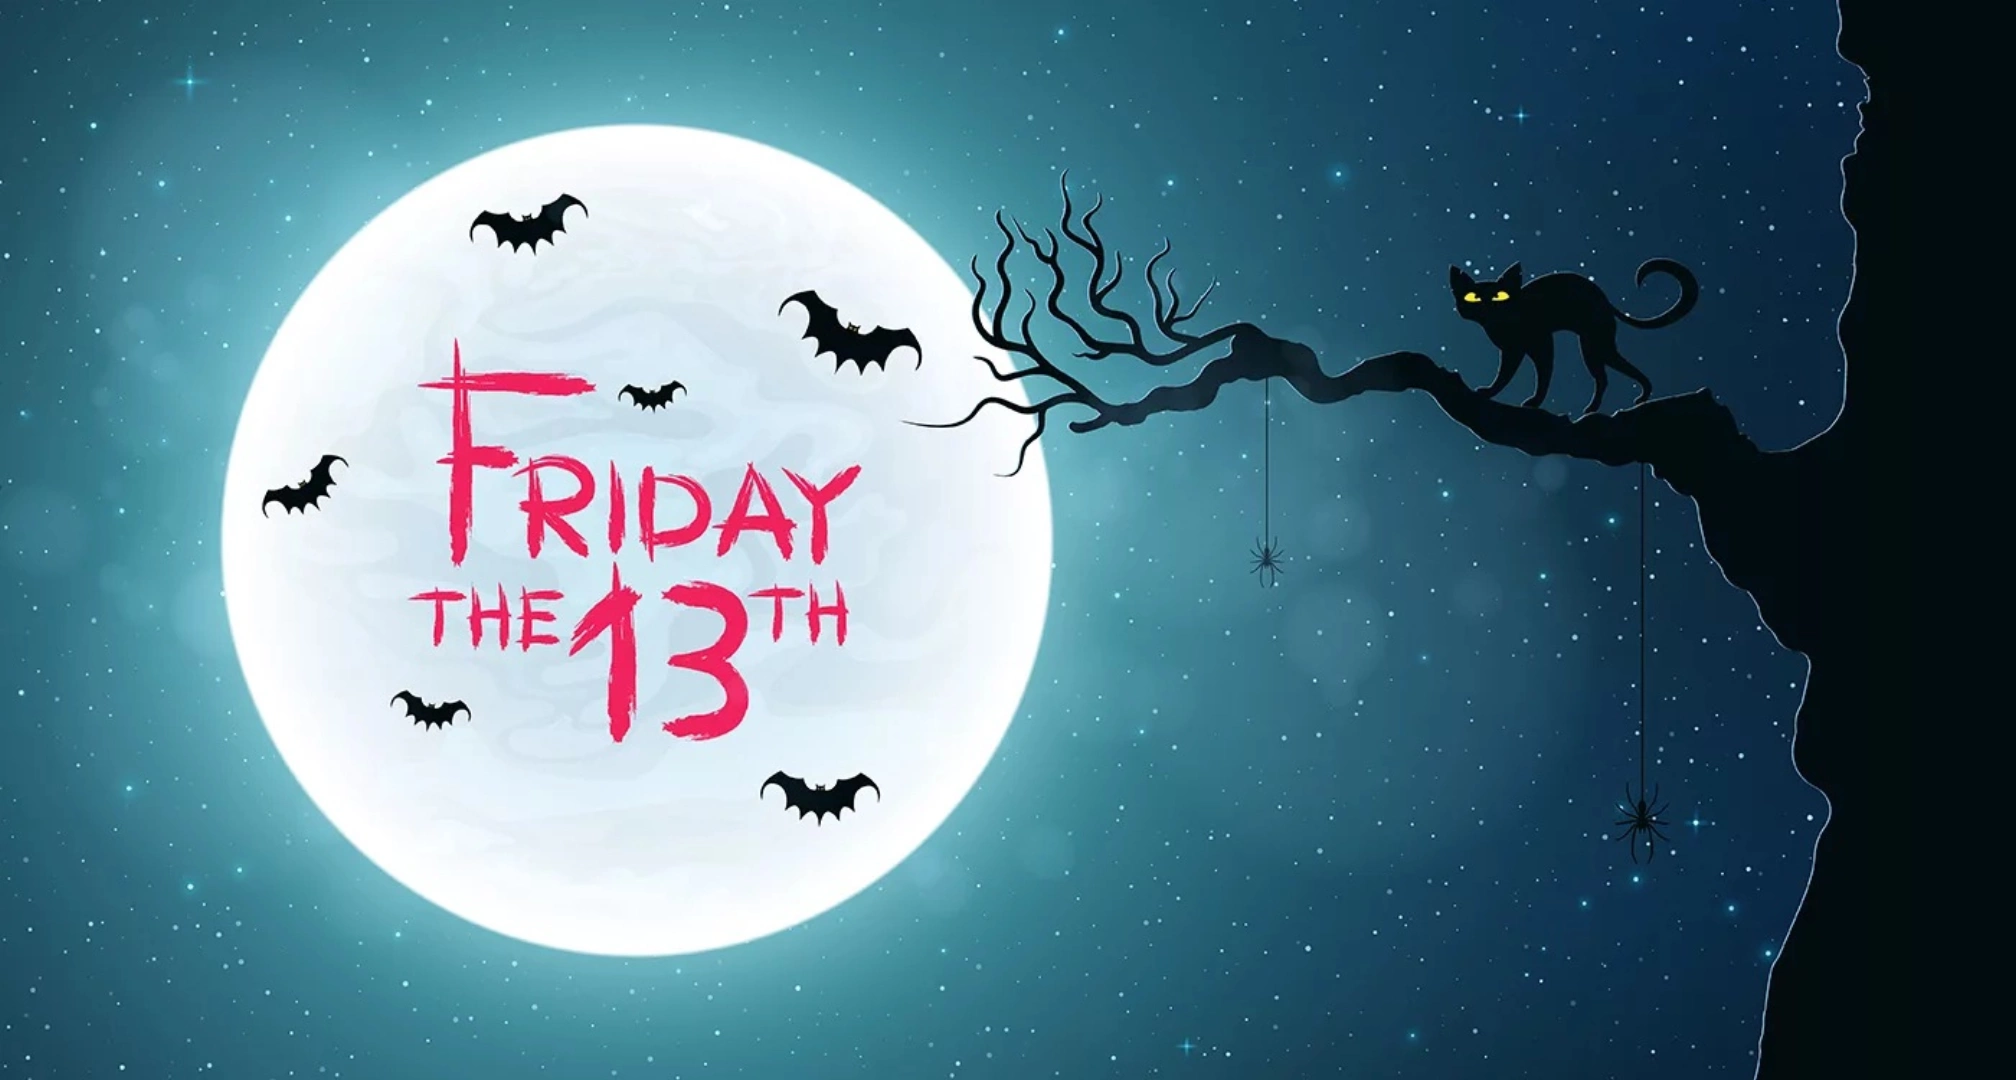 Countdown to Friday the 13th online